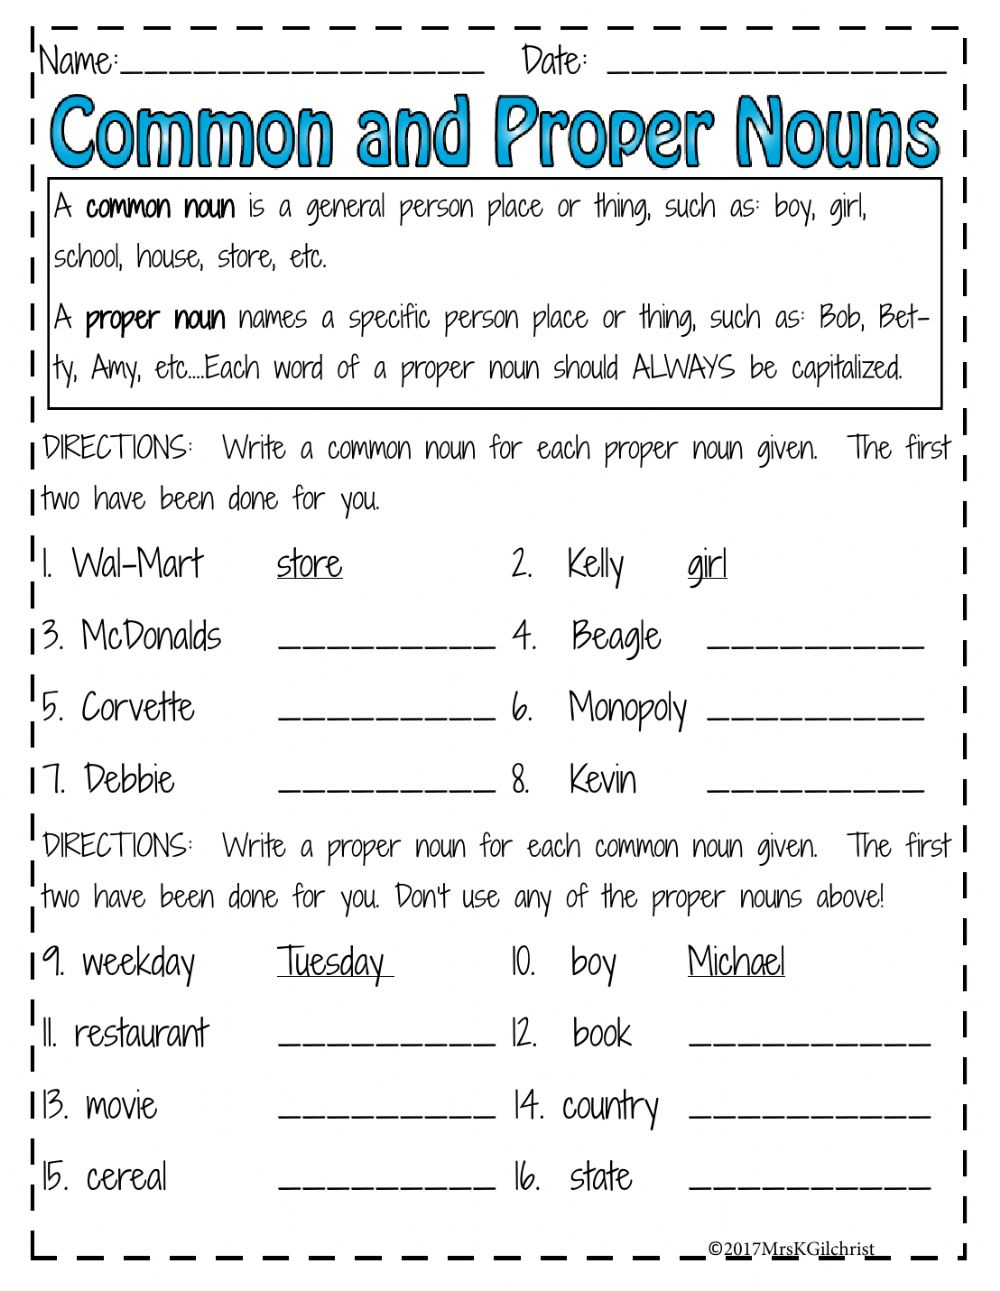 Proper Or Common Nouns Worksheet Proper And Common Nouns 2 Worksheet